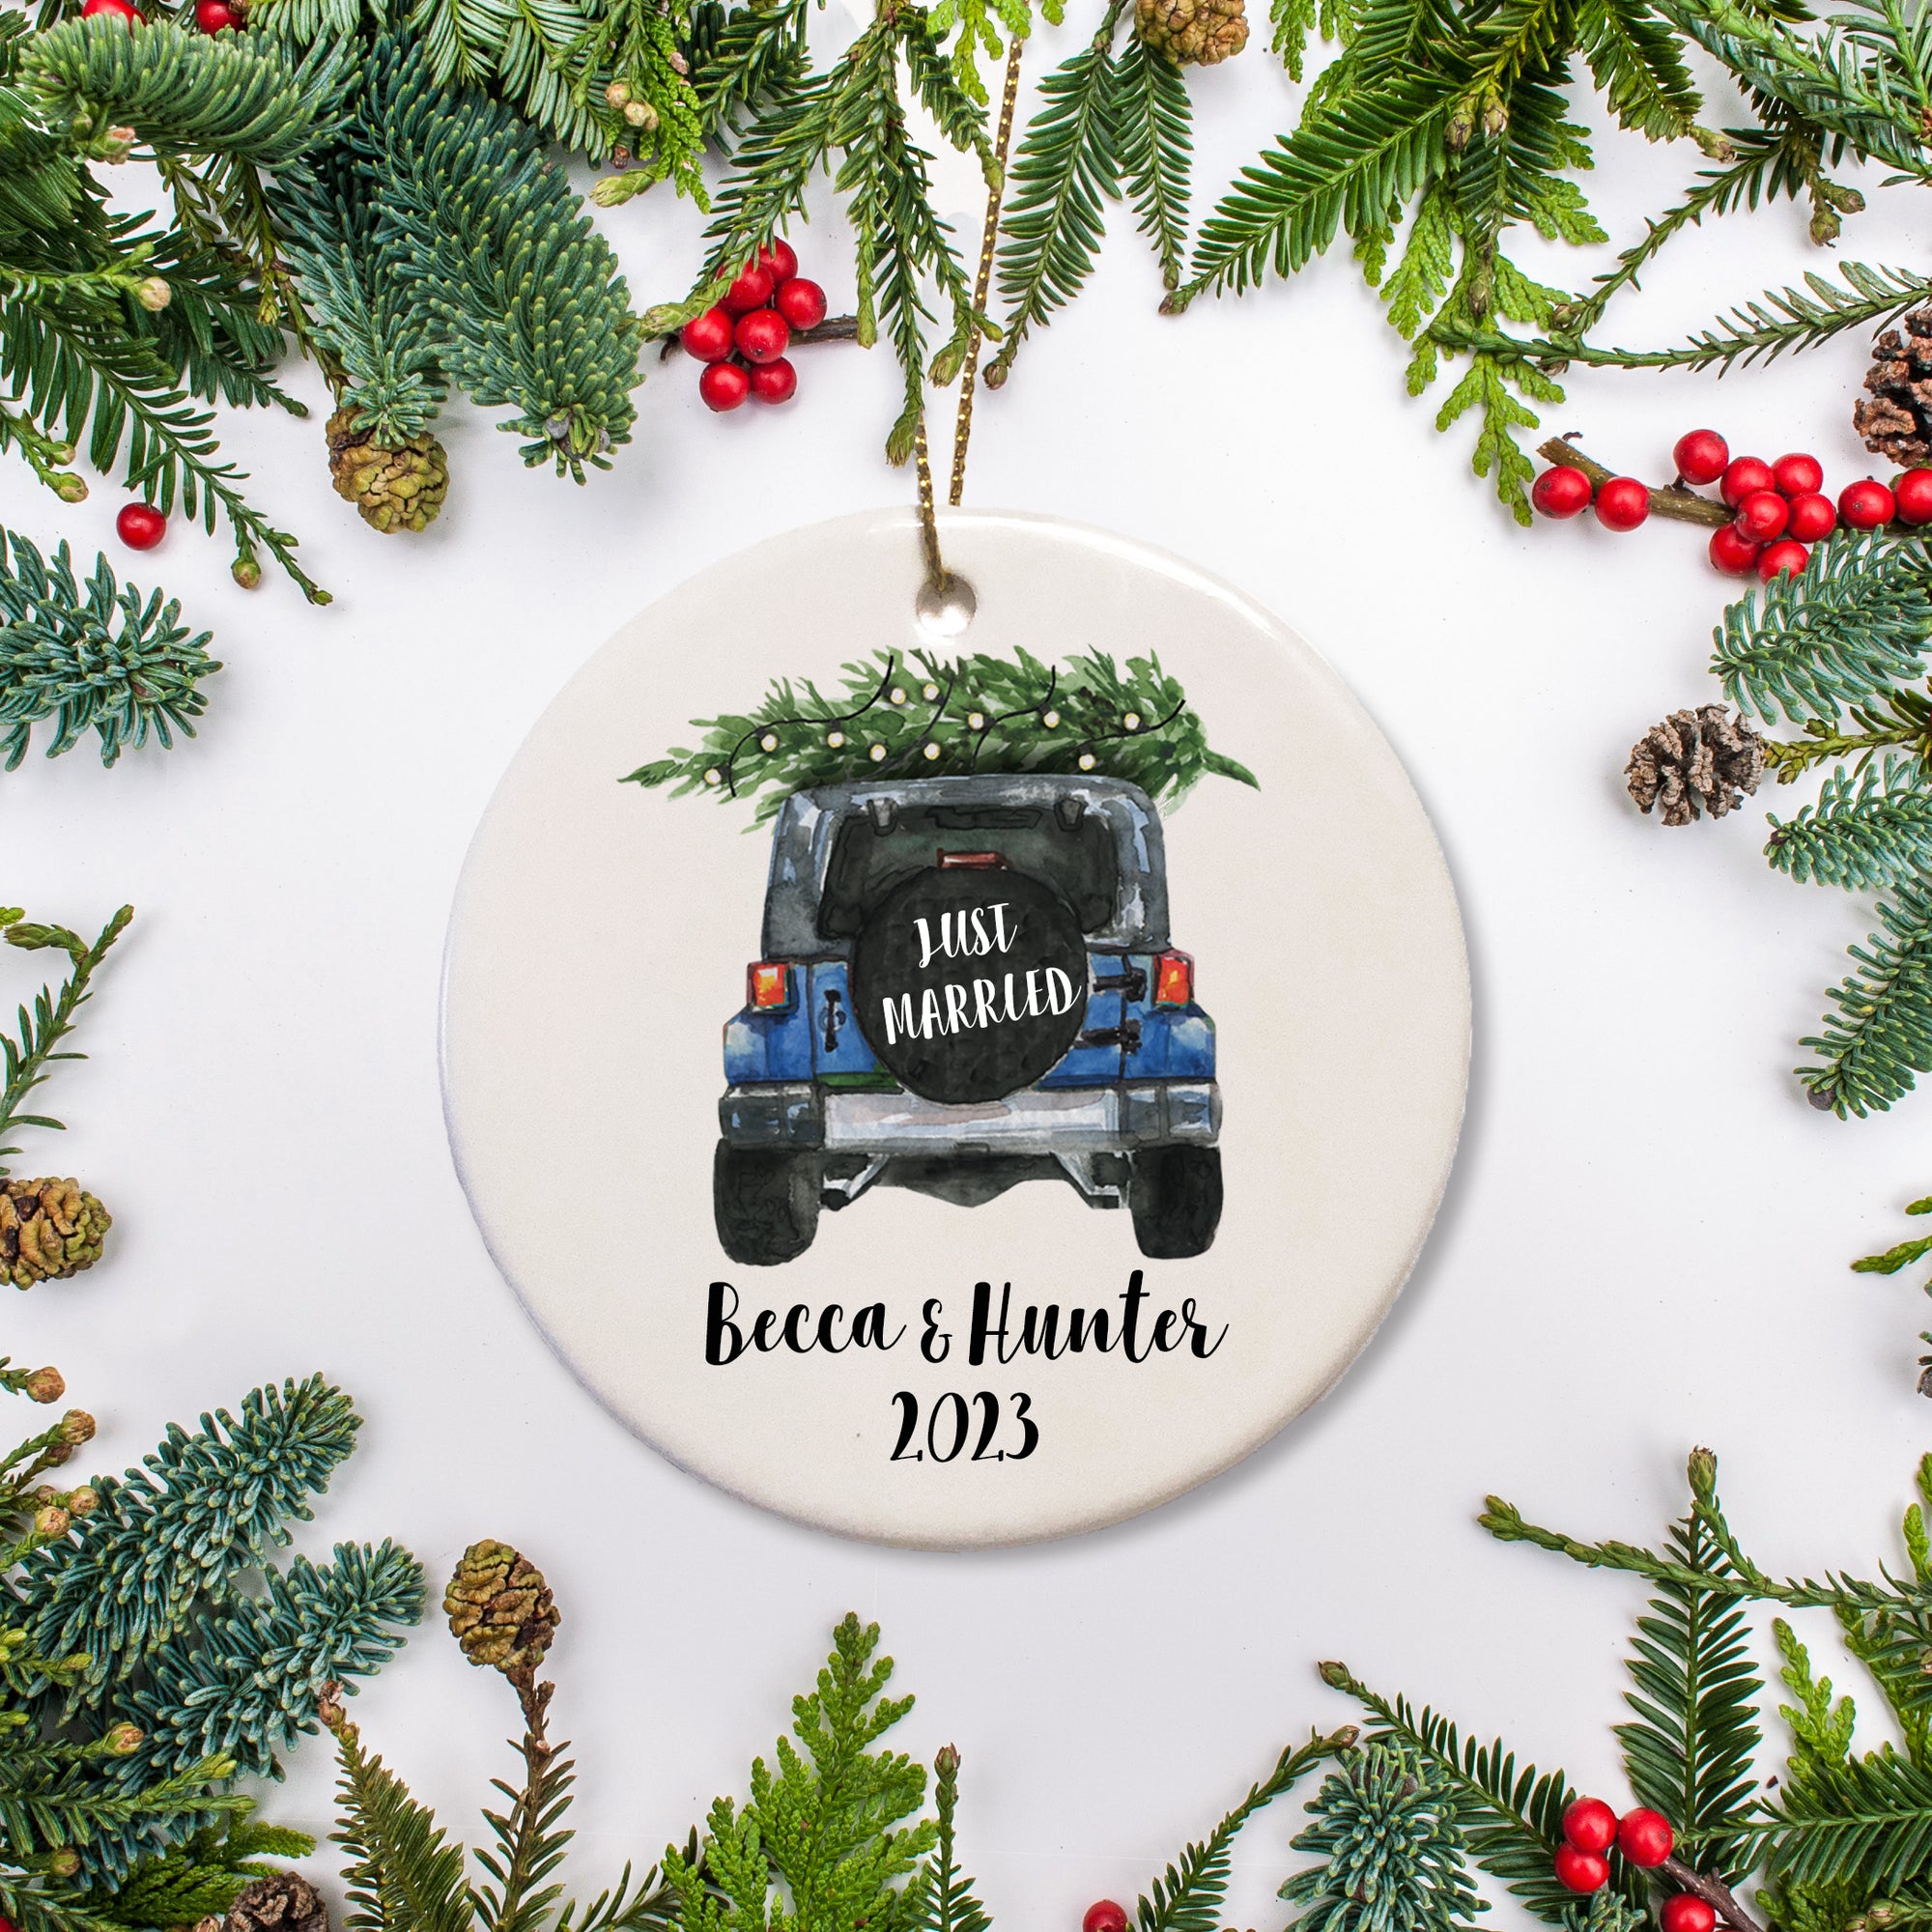 A keepsake ornament of a jeep which says “Just Married” with a Christmas tree which is personalized and includes the year. The jeep is blue.